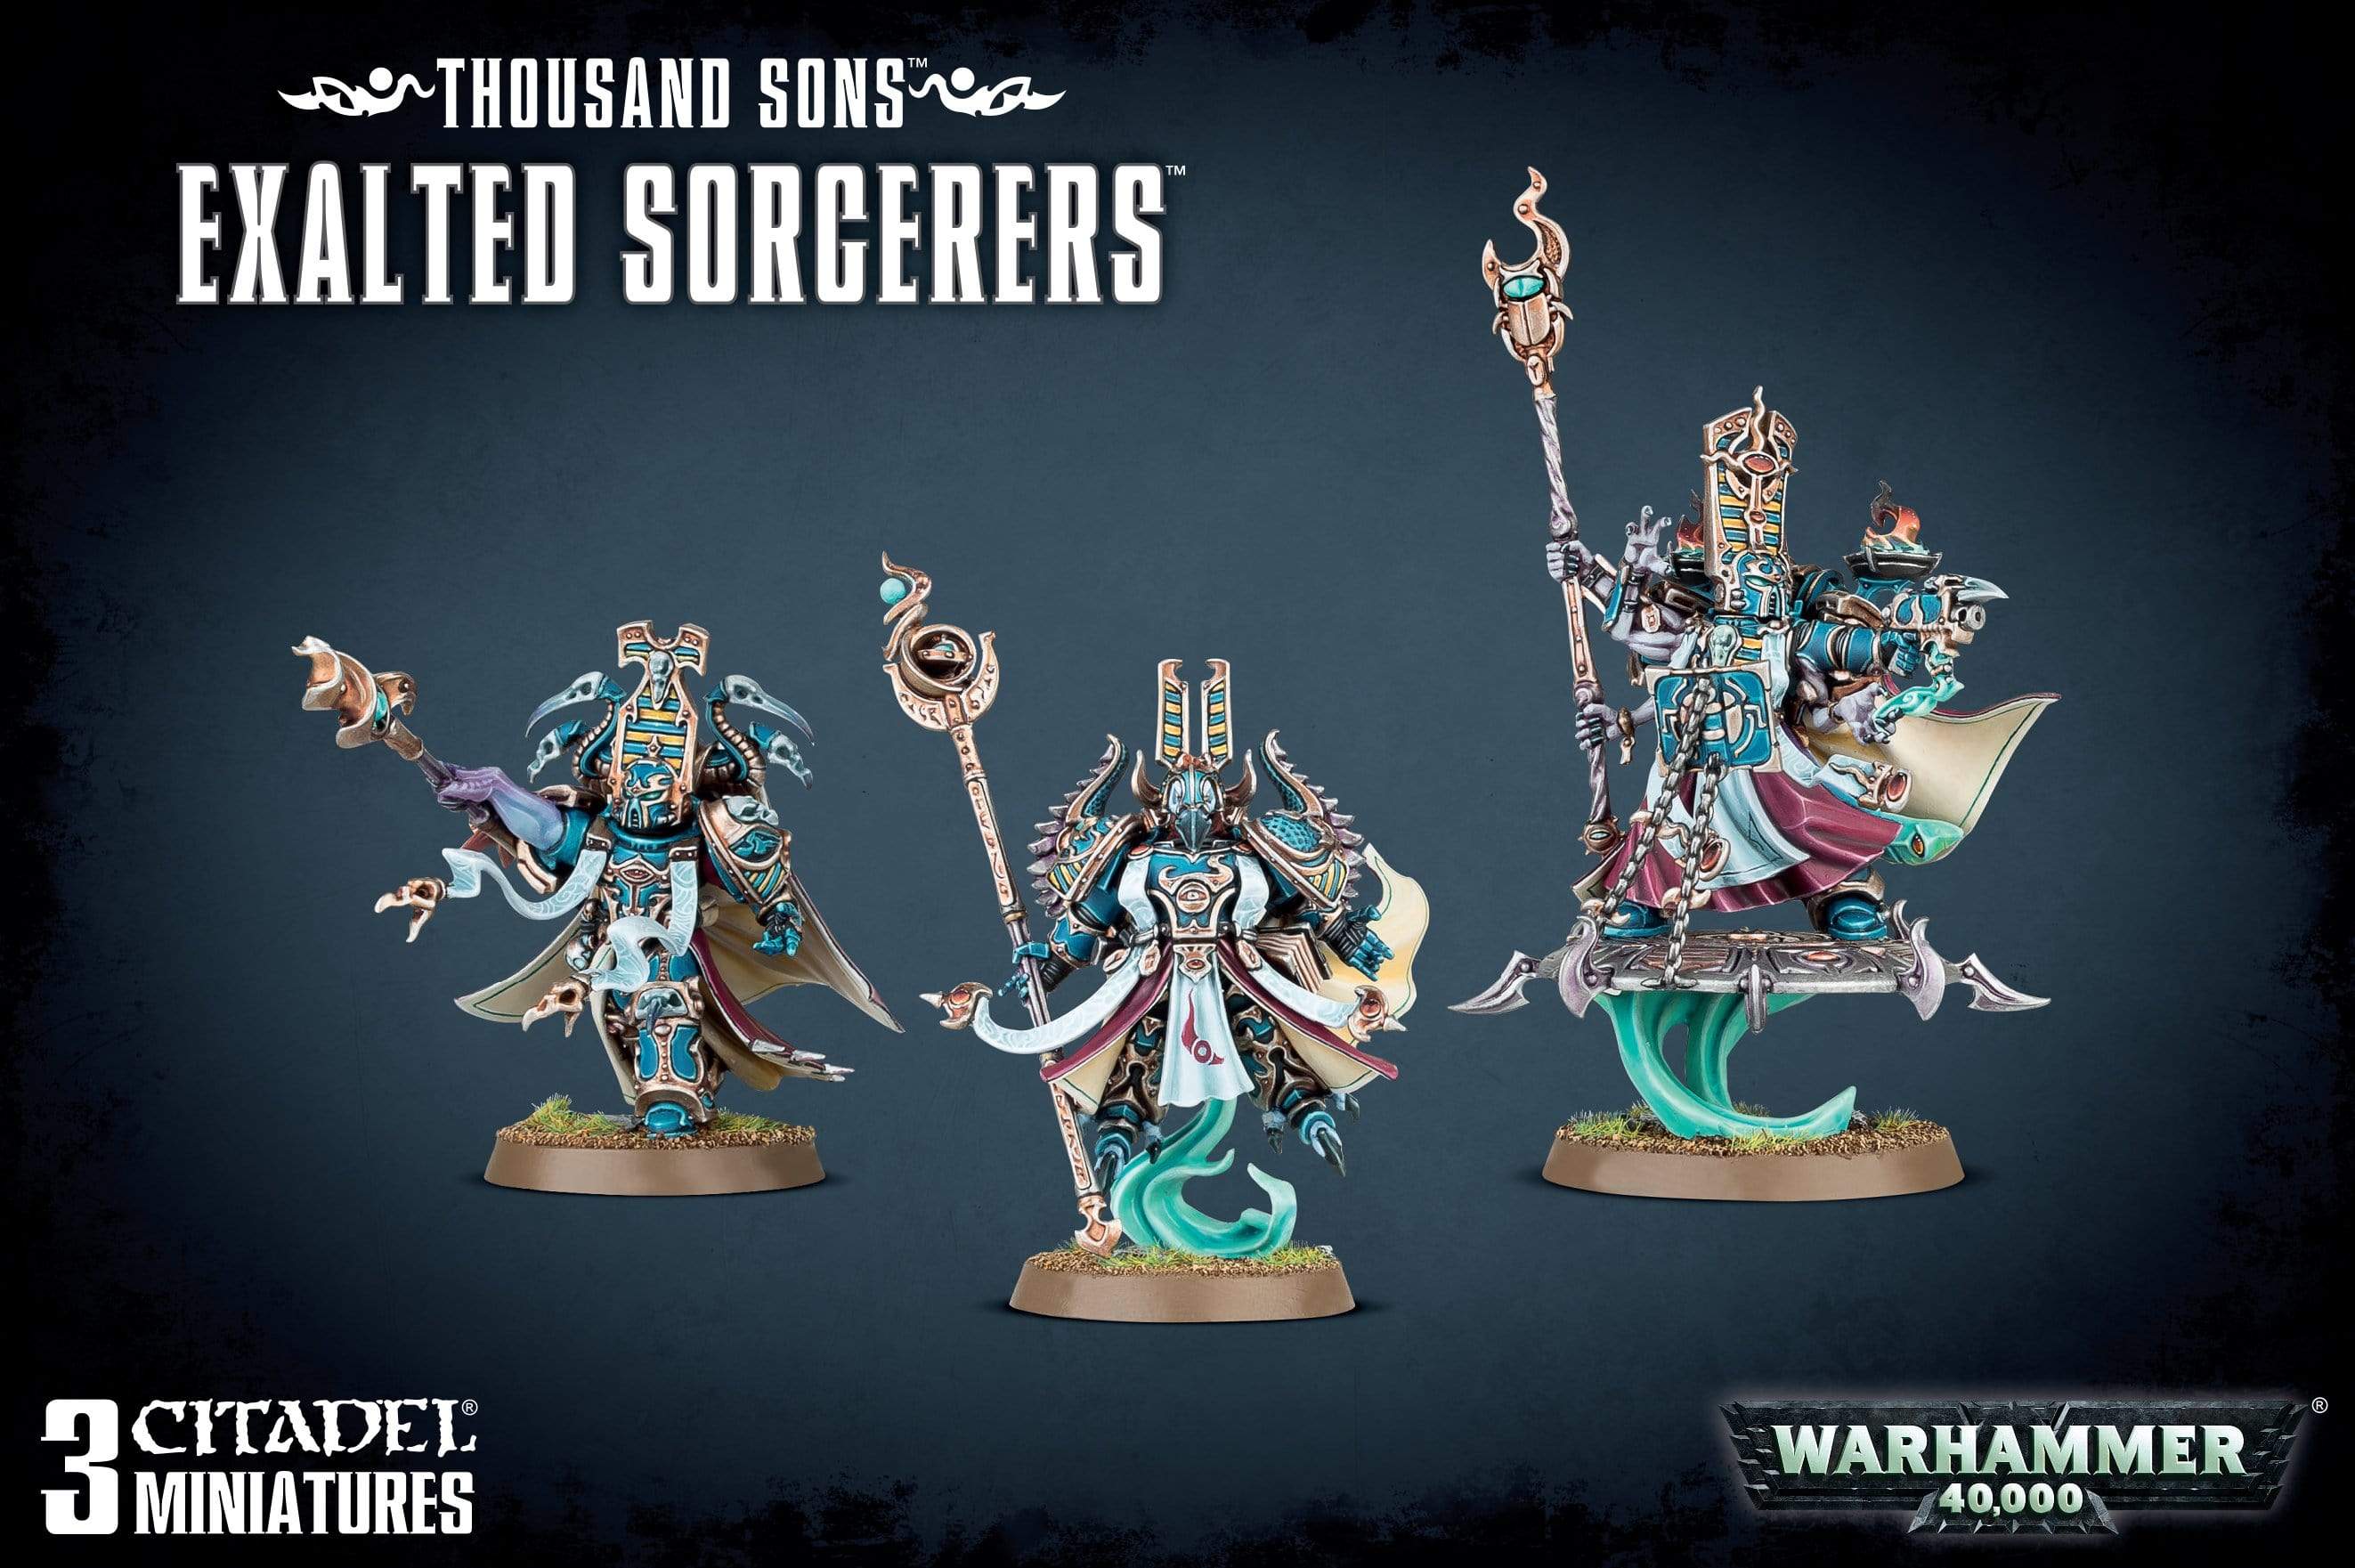 Thousand Sons: Exalted Sorcerers - Saltire Games